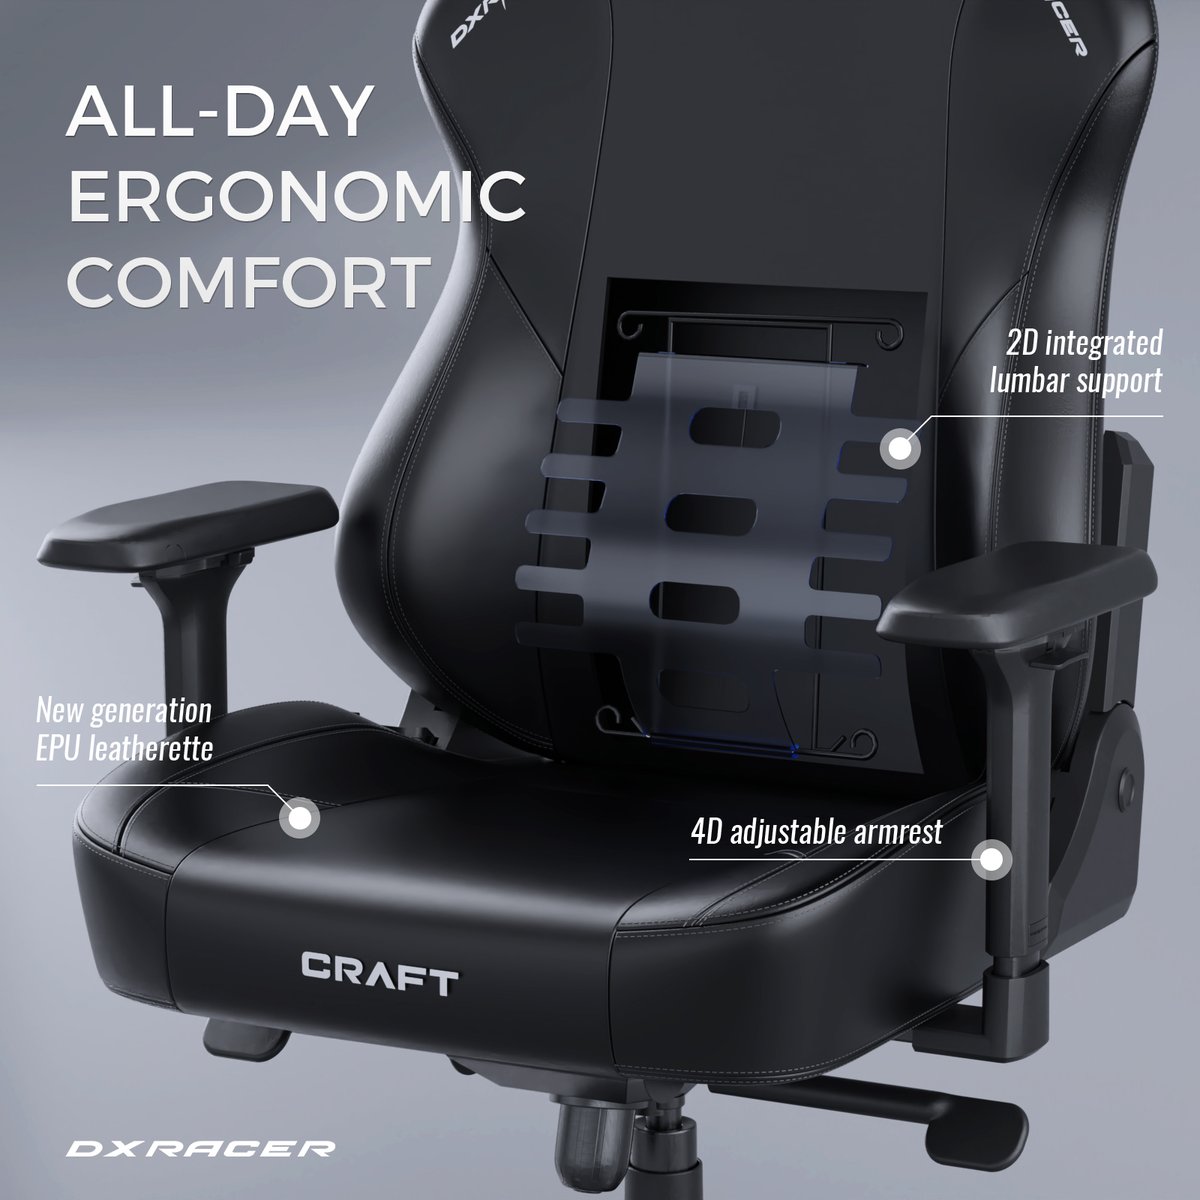 Streamlined essentials. Unmatched comfort. The DXRacer Craft Series is designed for day-long ergonomic support. Experience the core features of our flagship Craft.